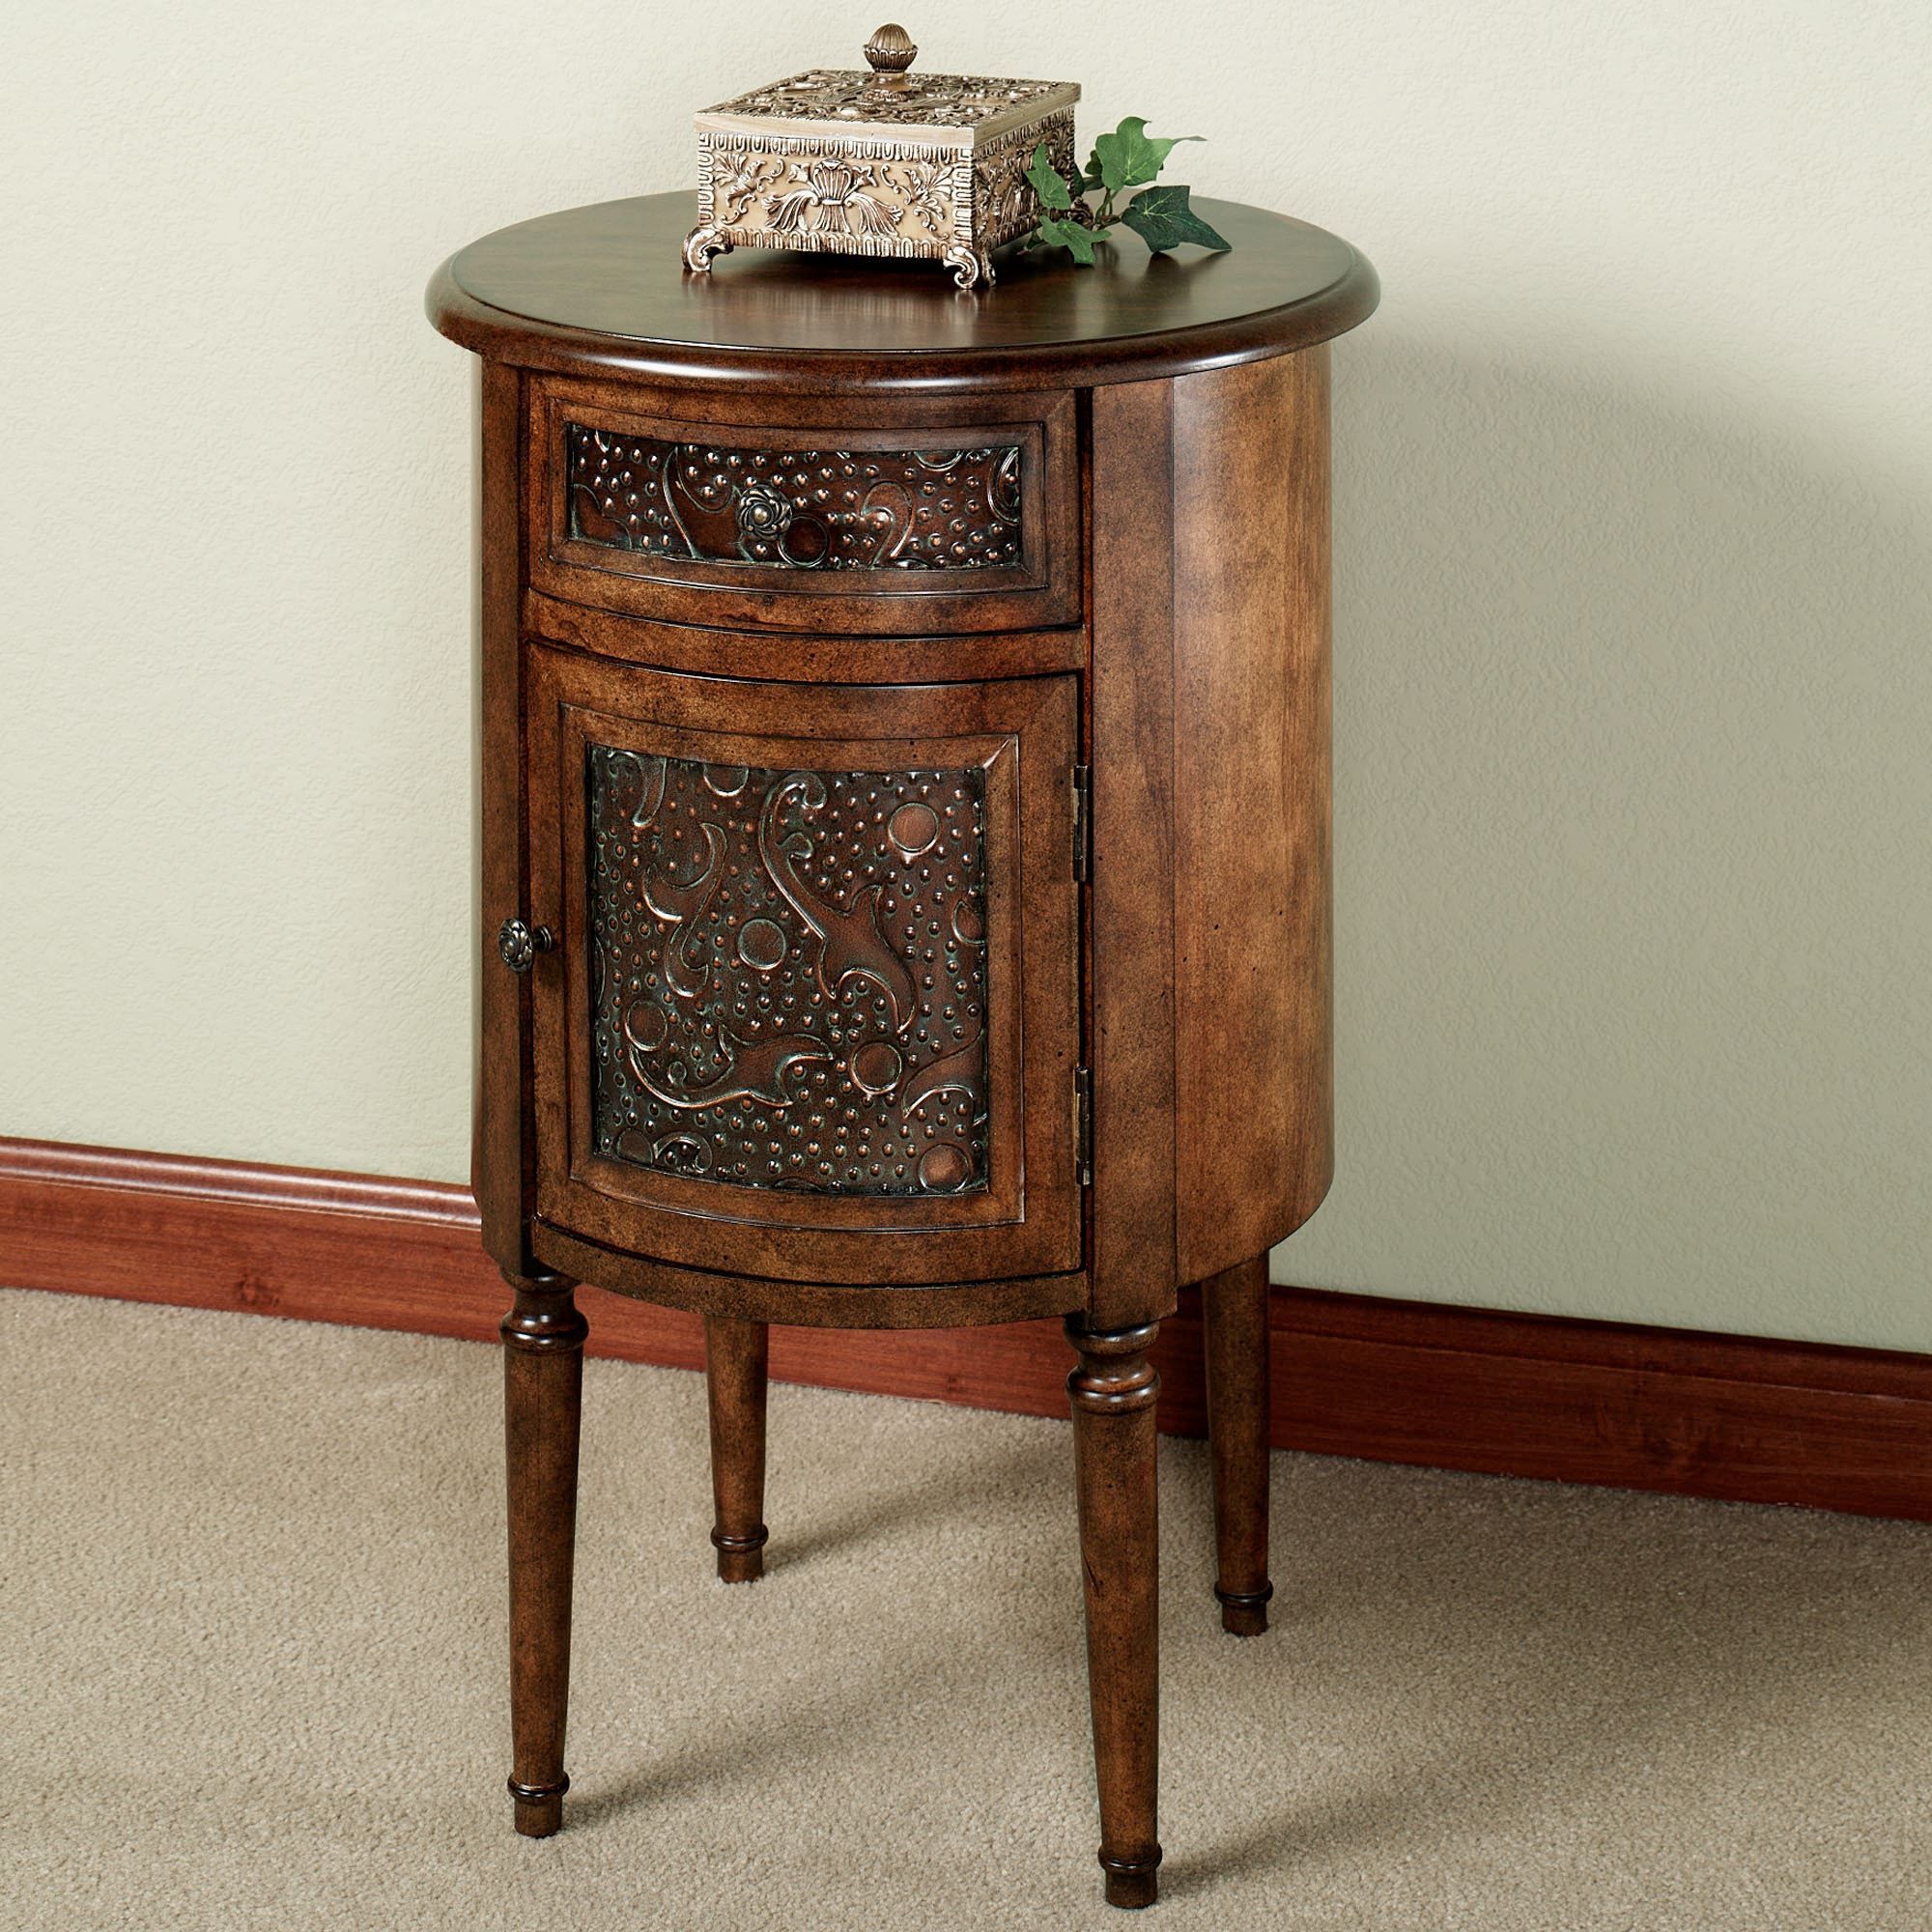 Lombardy Round Storage Accent Table In Walnut Wood Storage Trunk Console Tables (View 16 of 20)